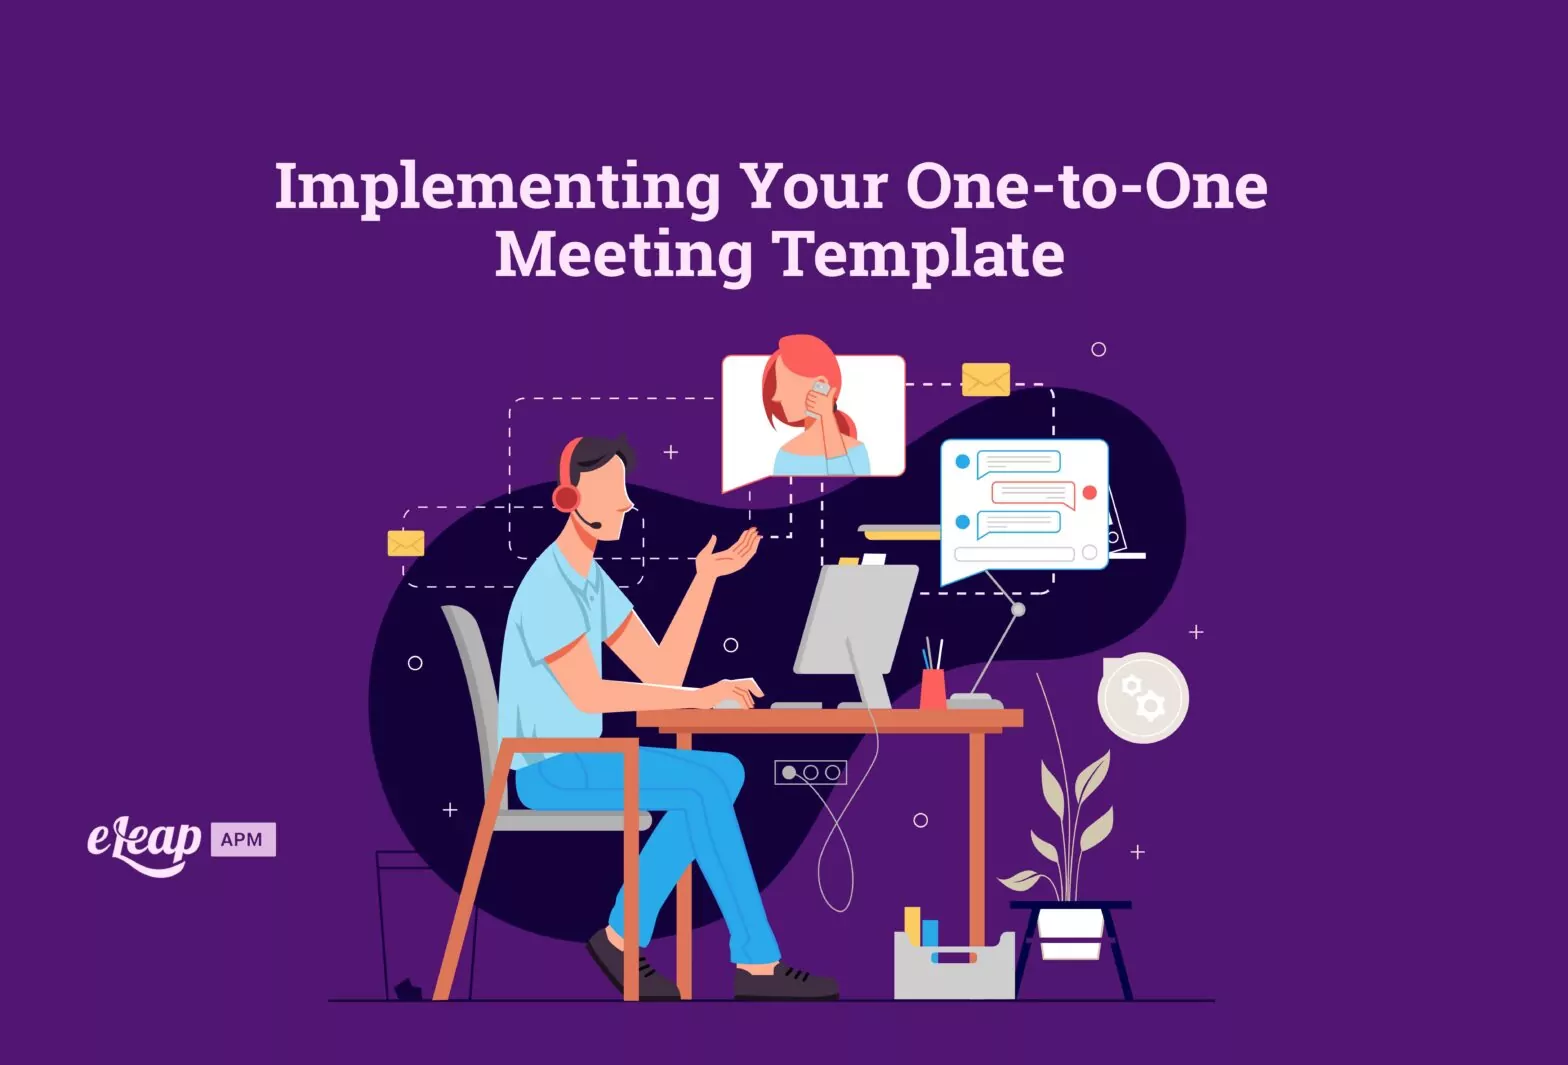 Implementing Your One-to-One Meeting Template